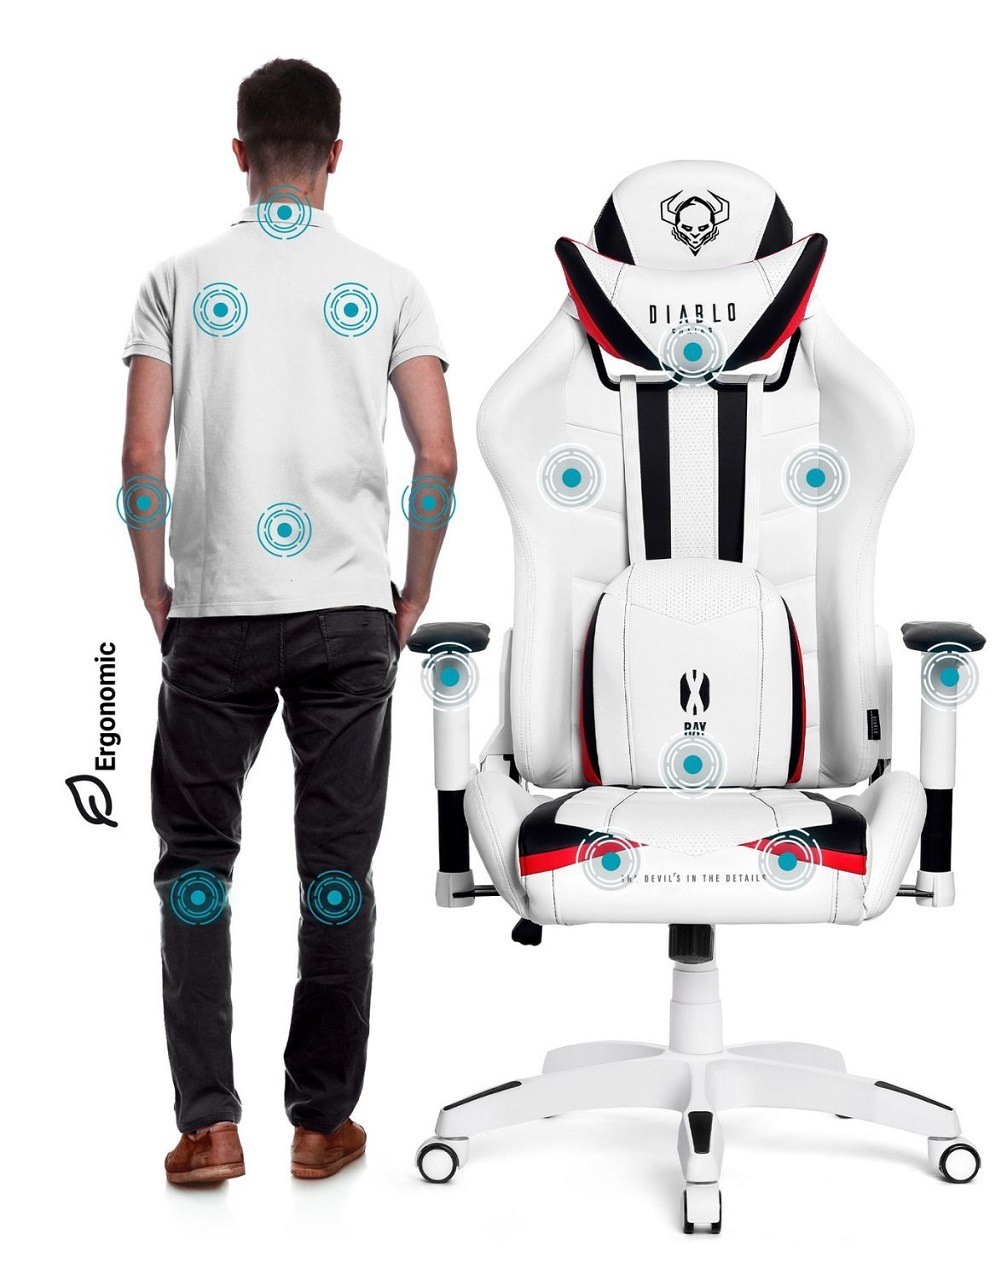 Diablo X-Ray gaming chair, white and black